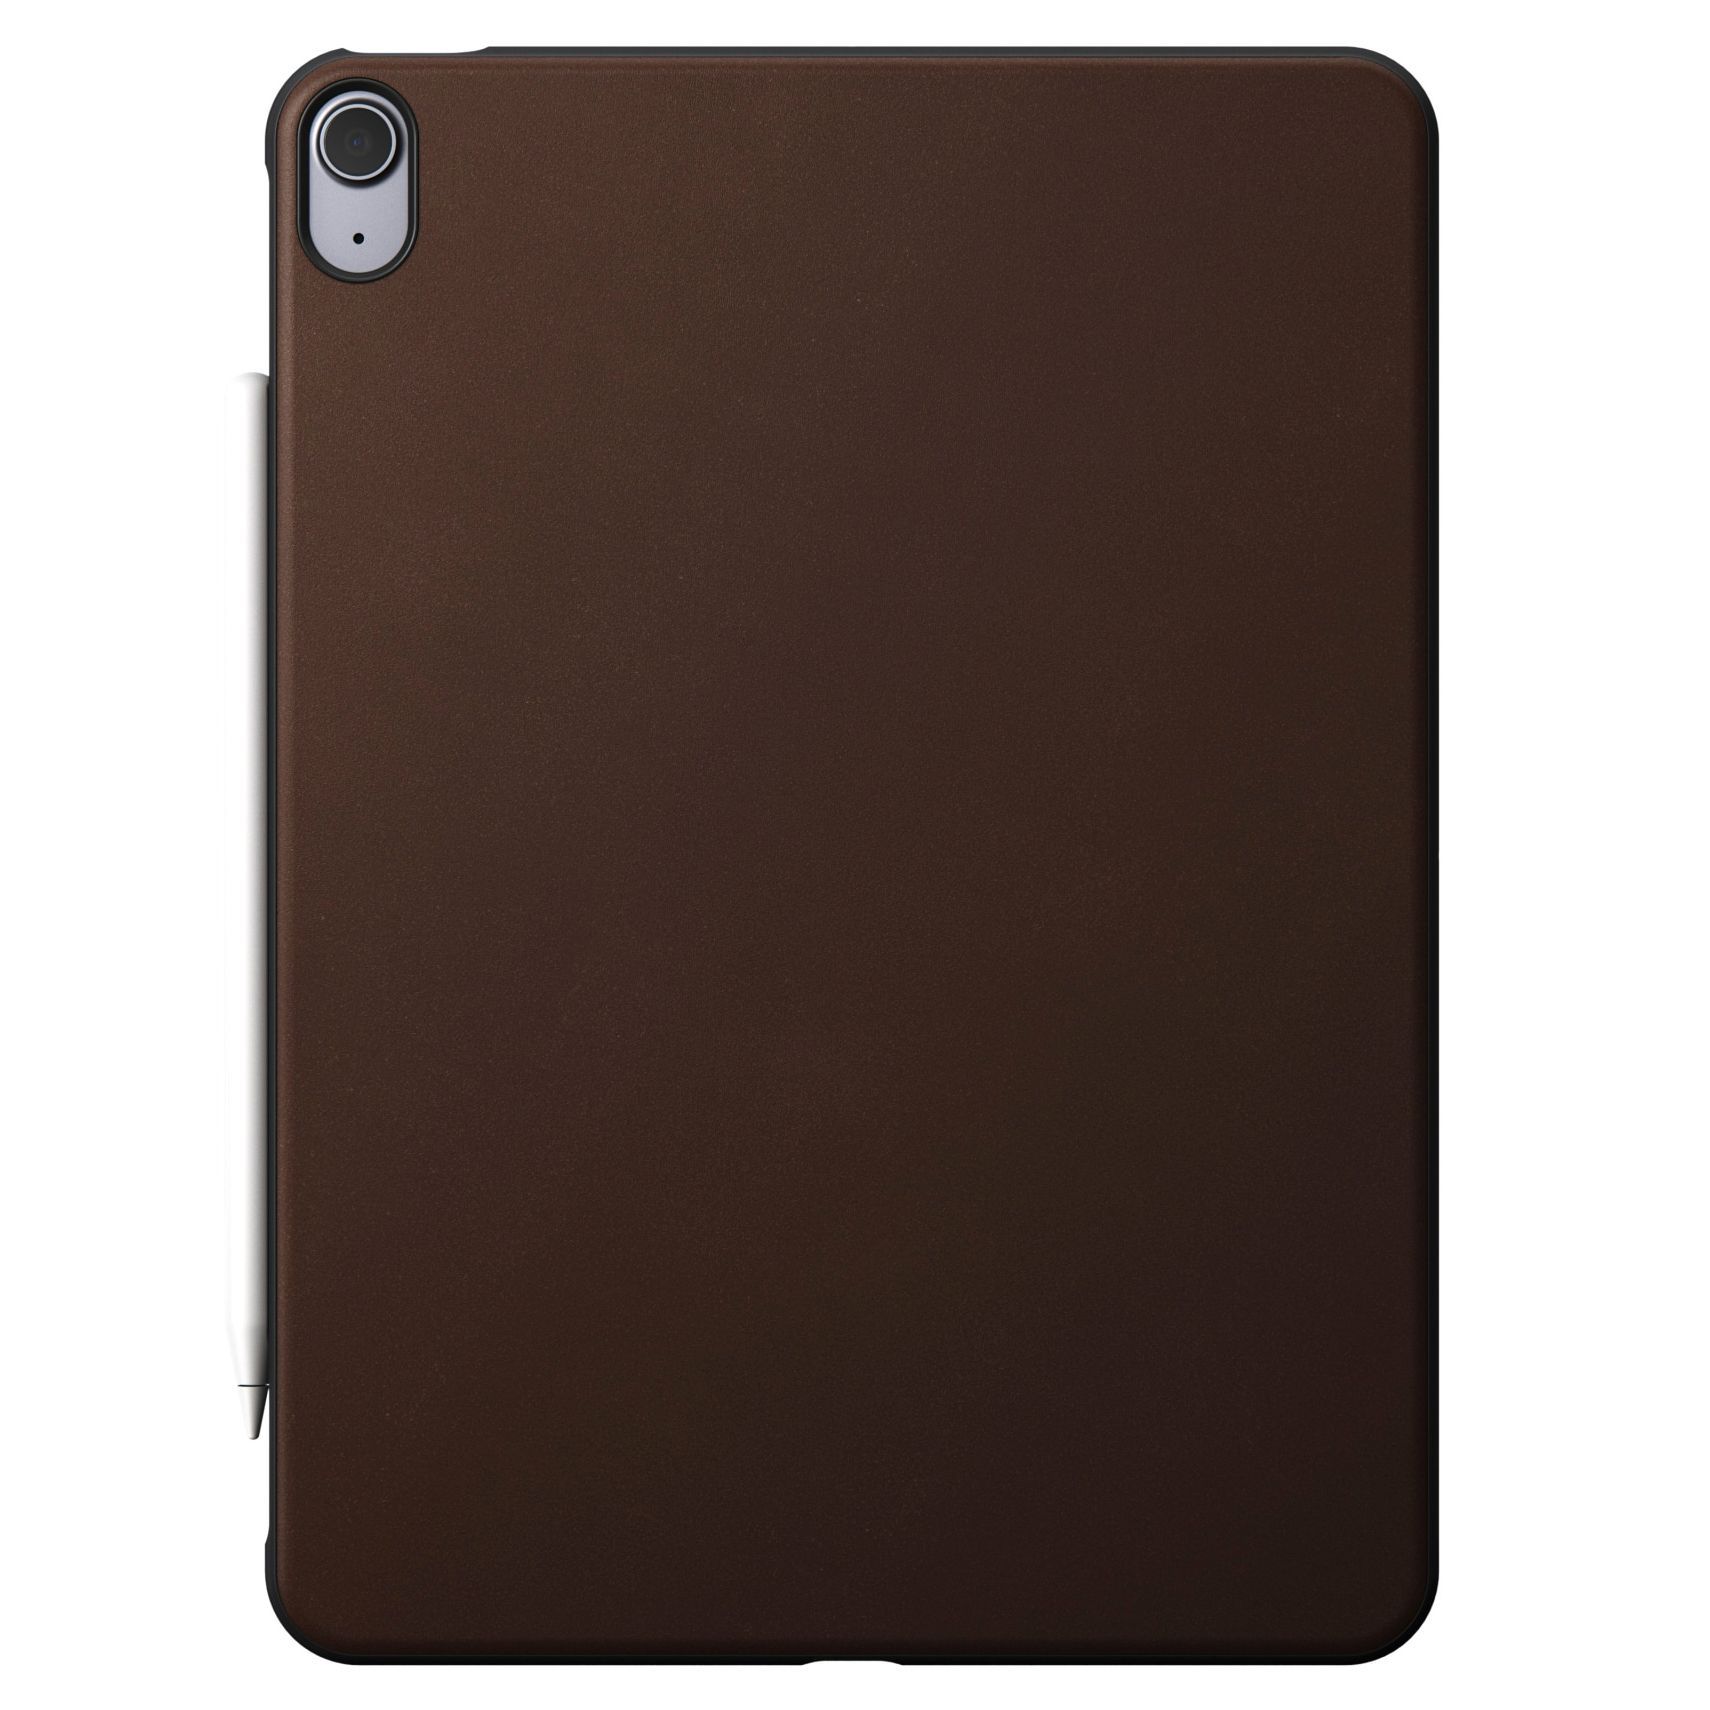 Nomad Rugged Case for iPad Air (4th and 5th Generation)